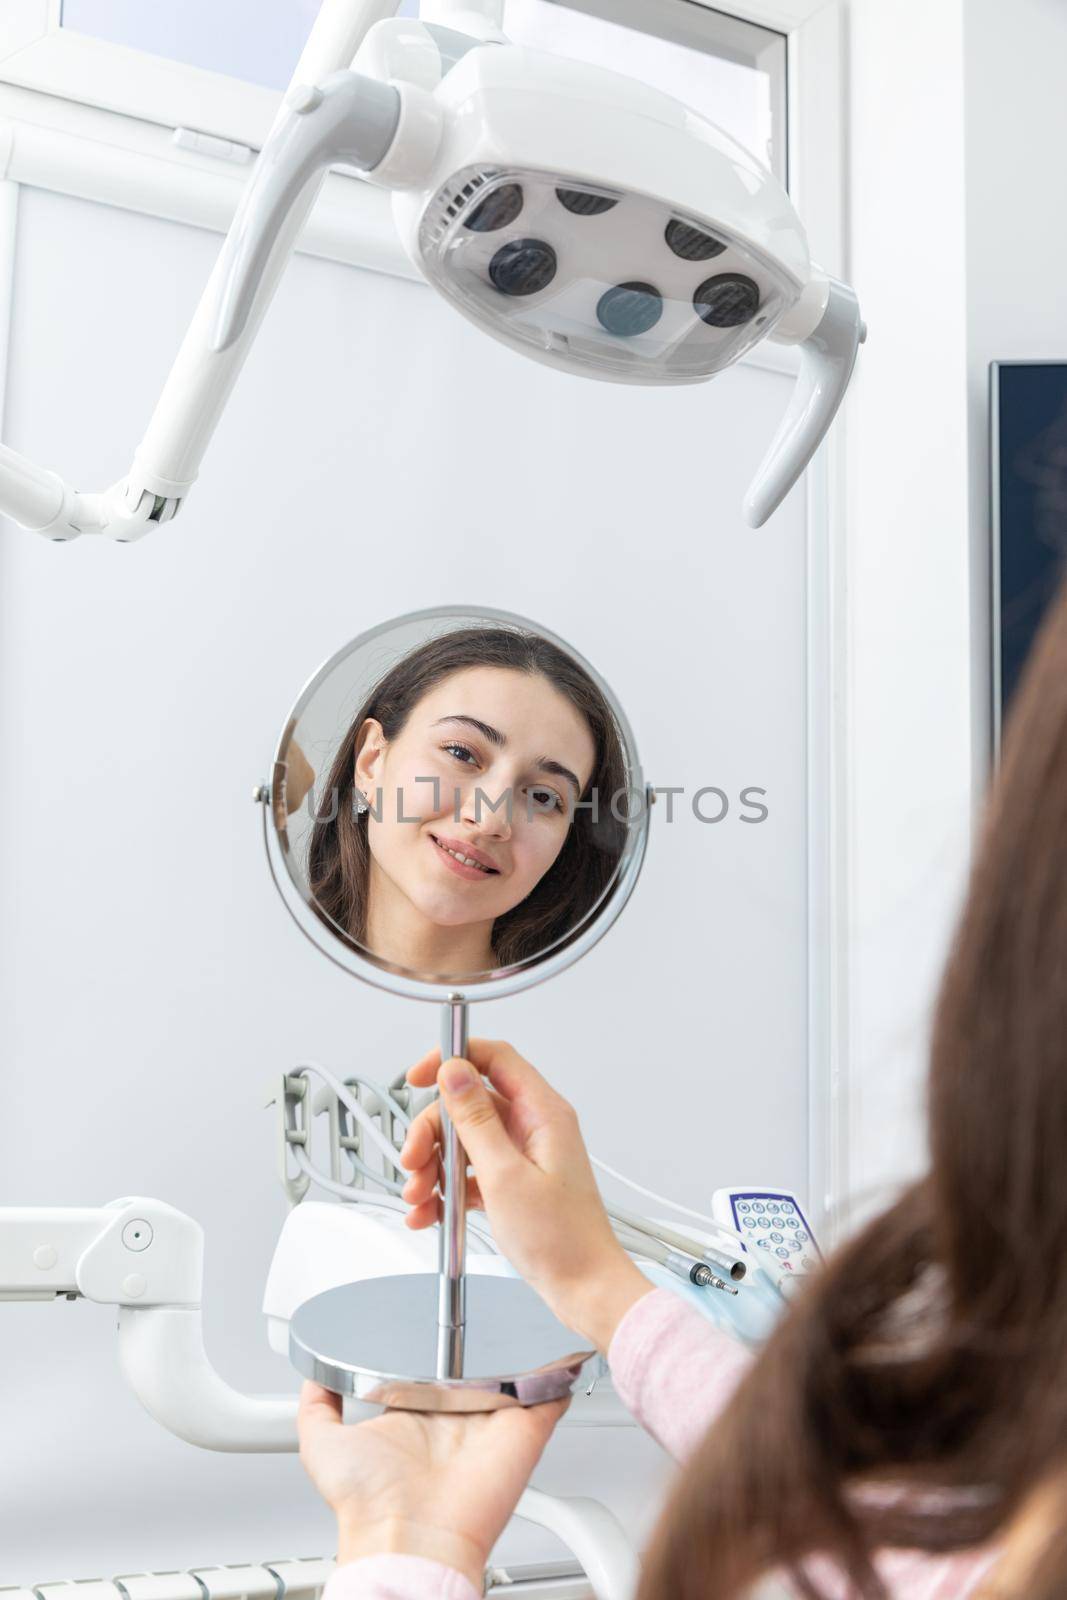 Young woman looking in a mirror after a dental procedure